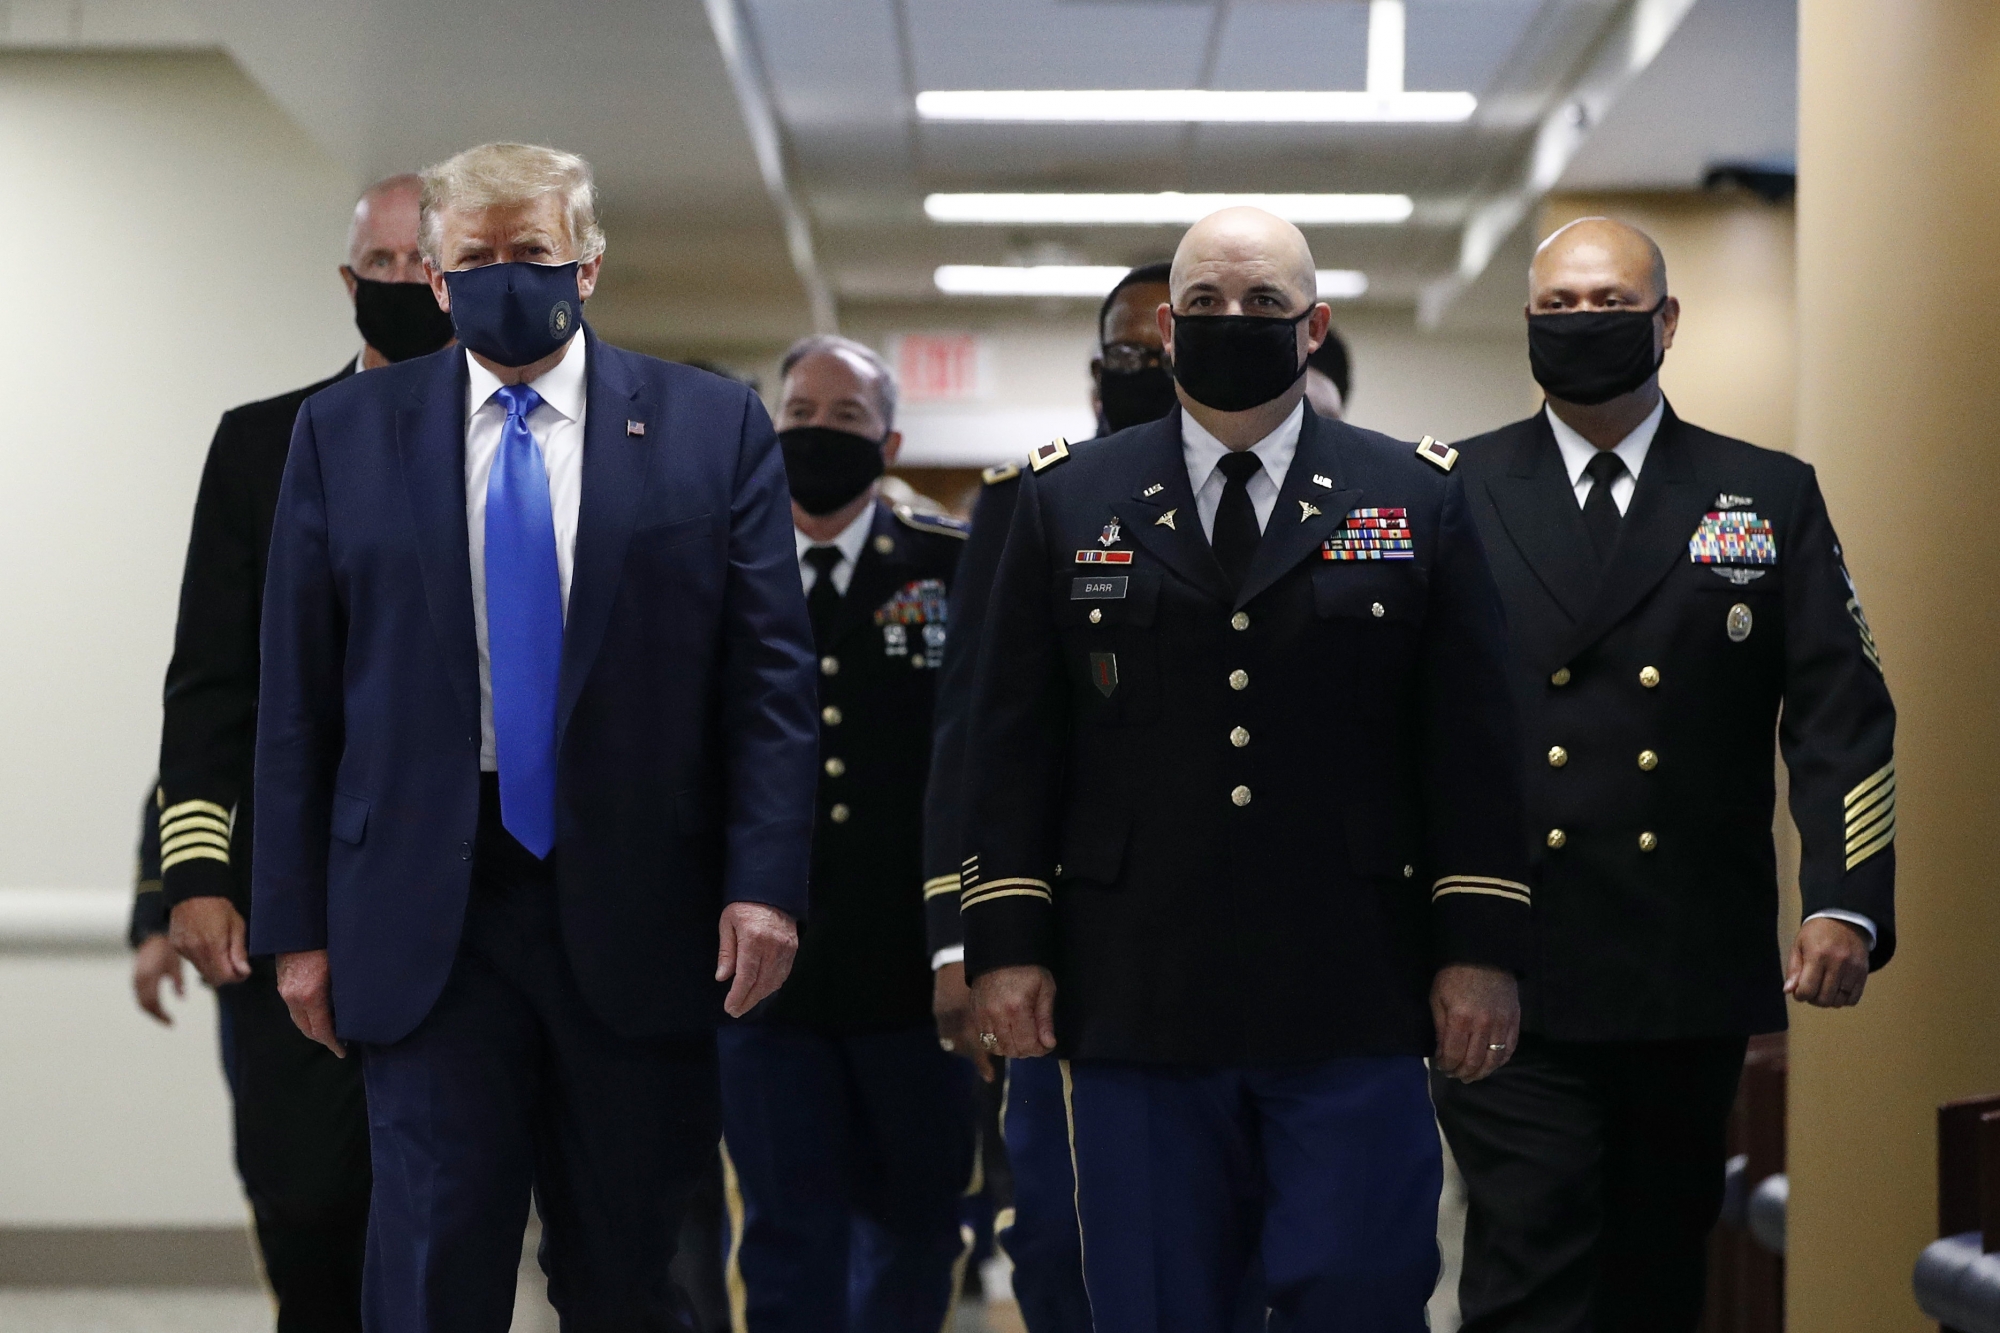 FILE - In this July 11, 2020, file photo President Donald Trump, foreground left, wears a face mask as he walks with others down a hallway during a visit to Walter Reed National Military Medical Center in Bethesda, Md. On Tuesday, July 21, Trump professed a newfound respect for the protective face masks he has seldom worn. ‚ÄúWhether you like the mask or not, they have an impact," he said. "I‚Äôm getting used to the mask,‚Äù he added, pulling one out after months of suggesting that mask-wearing was a political statement against him. (AP Photo/Patrick Semansky, File) Donald Trump ArcInfo